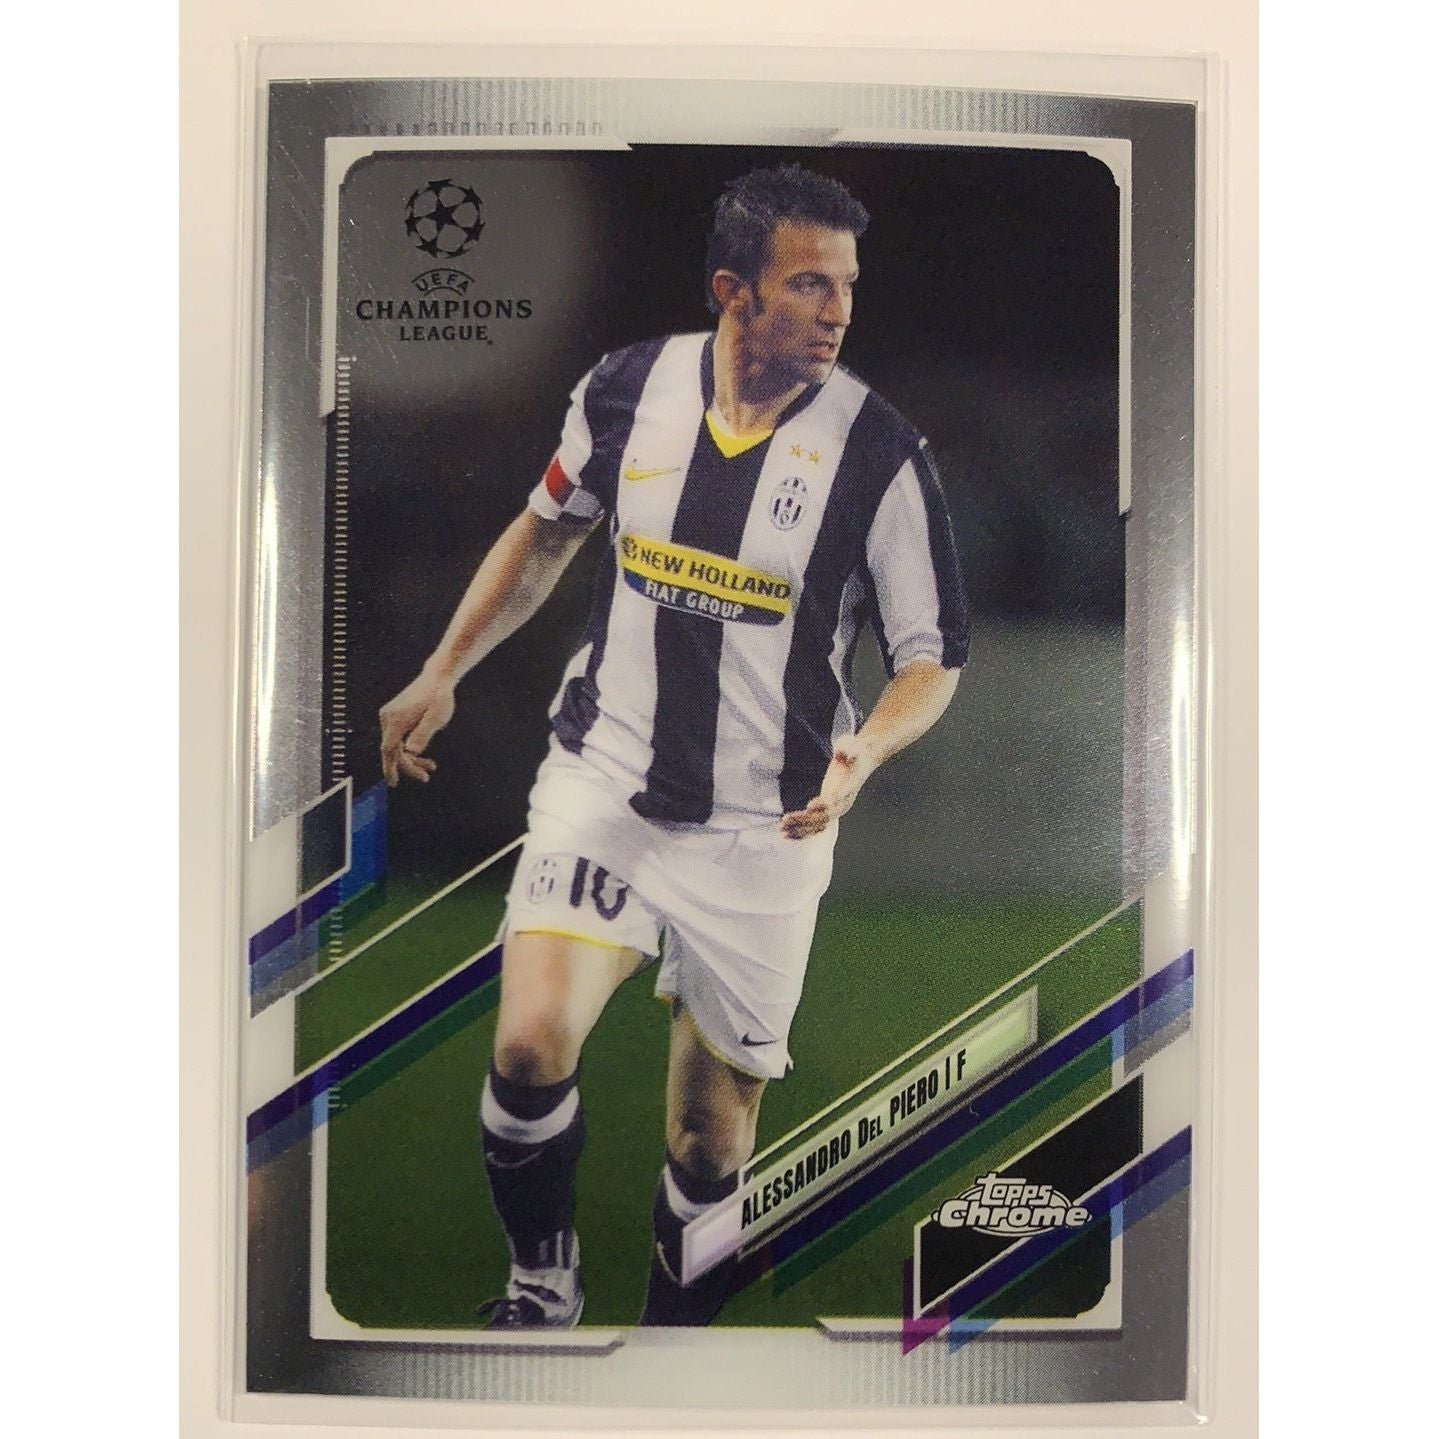  2021 Topps Chrome UEFA Champions League Alessandro Del Piero Base #14  Local Legends Cards & Collectibles